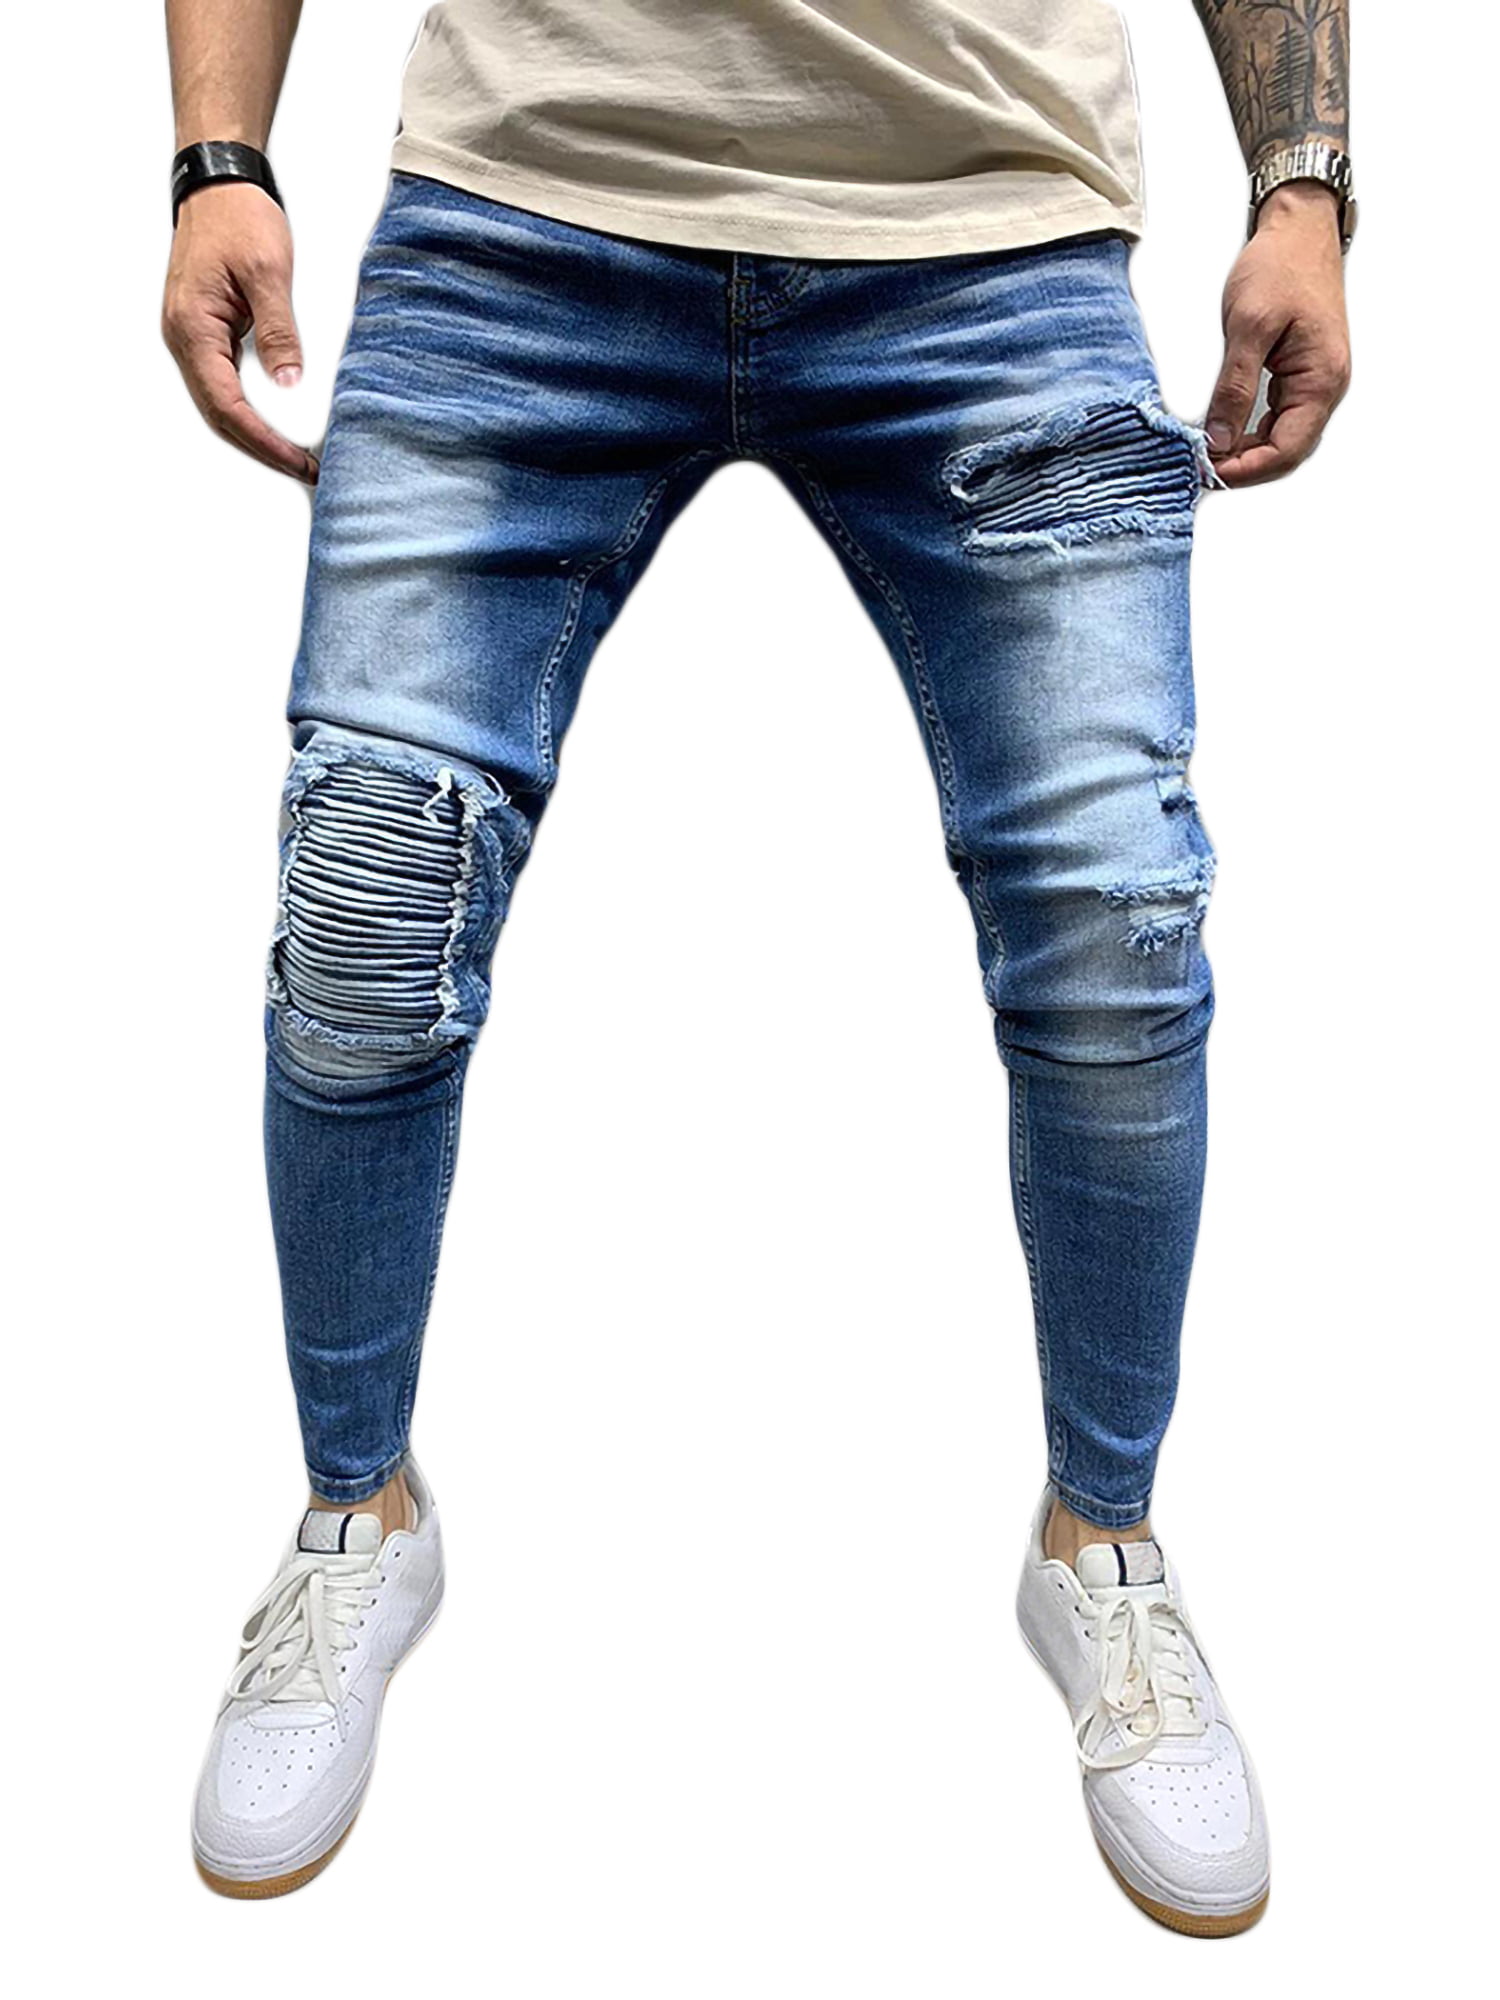 Blue Jeans for Men Relaxed Fit,Forthery Mens Blue Skinny Ripped Distressed Slim Fit Destroyed Stretch Moto Biker Jeans